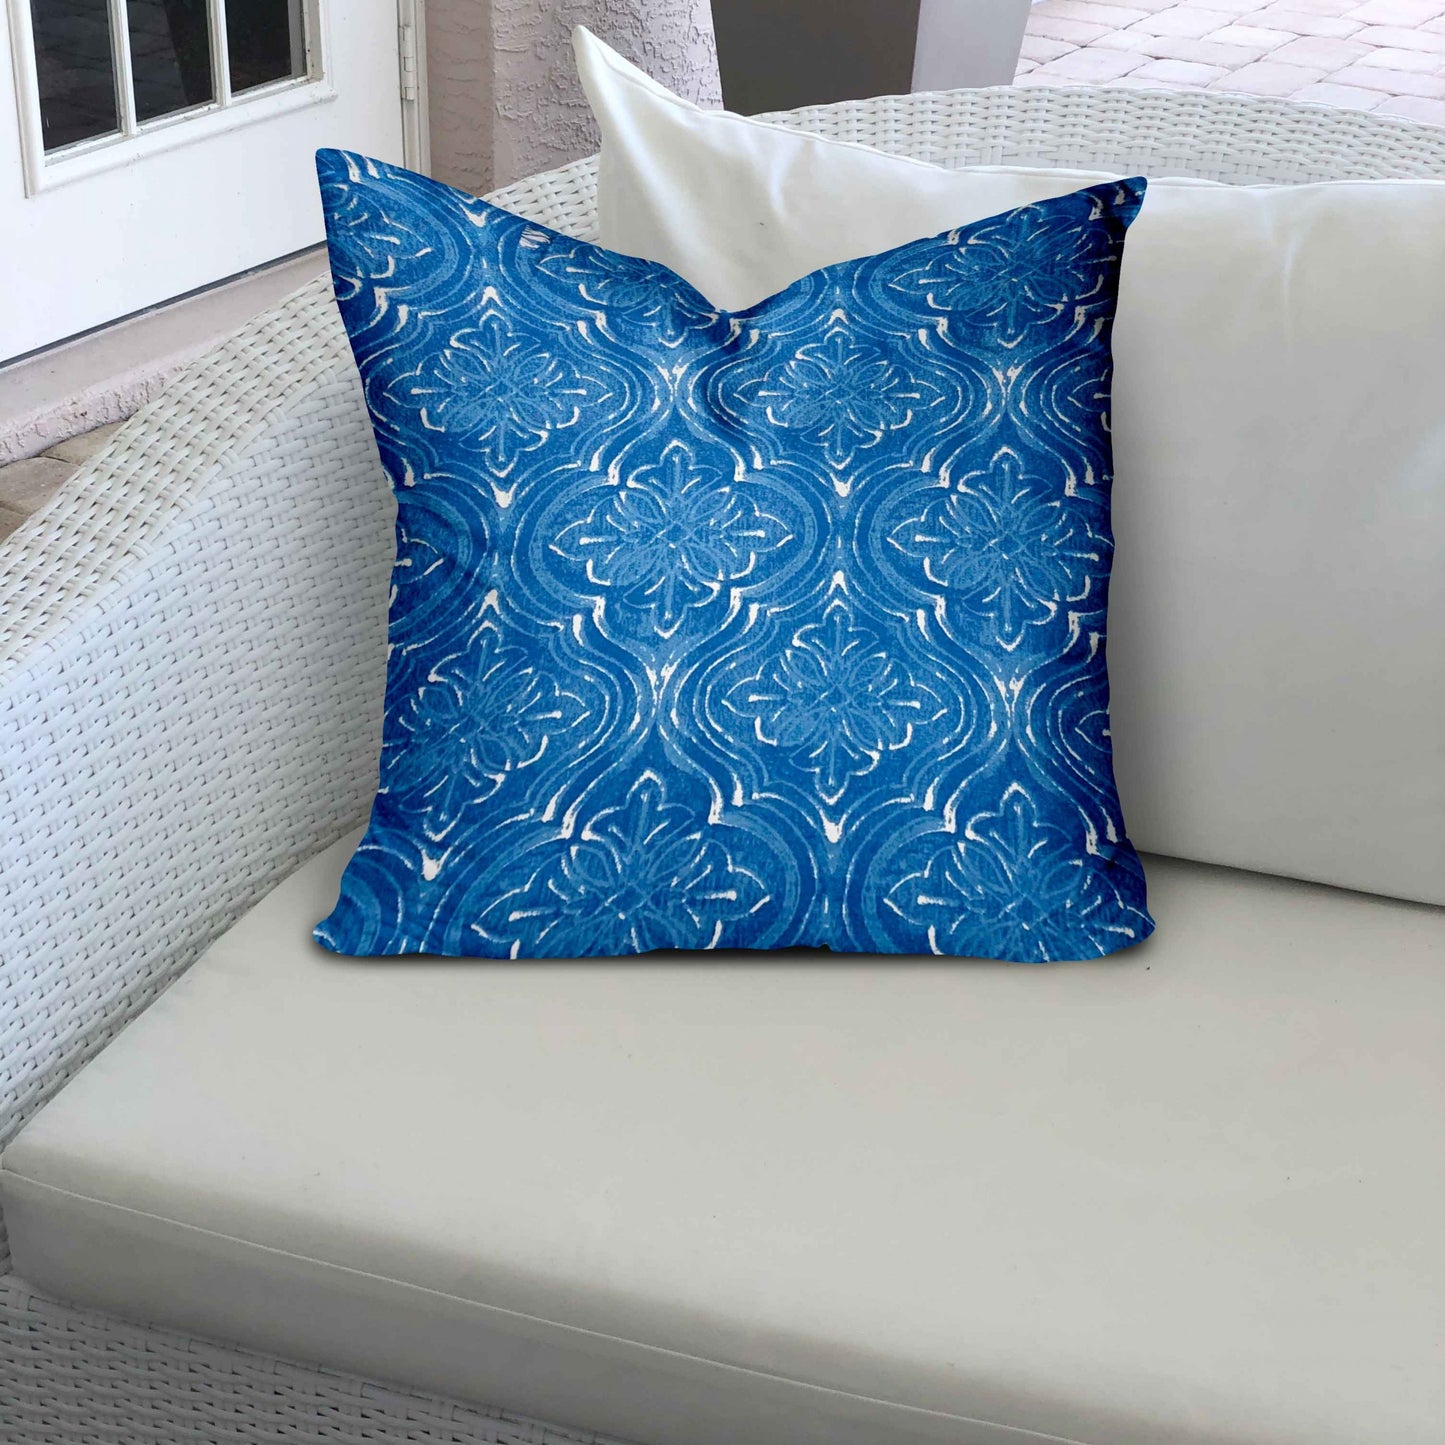 24" X 24" Blue And White Zippered Ikat Throw Indoor Outdoor Pillow Cover